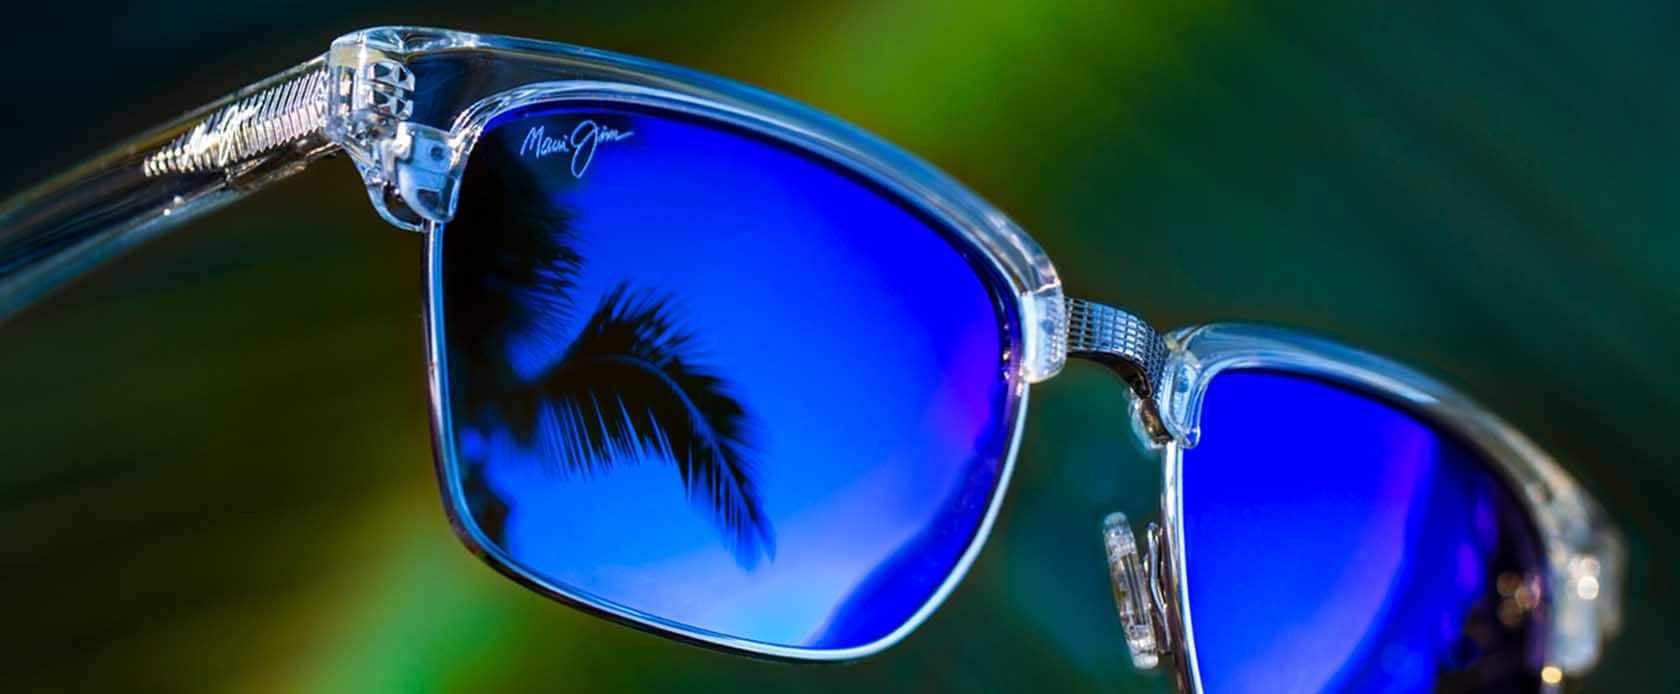 Sunglasses Care and Cleaning | Maui Jim®